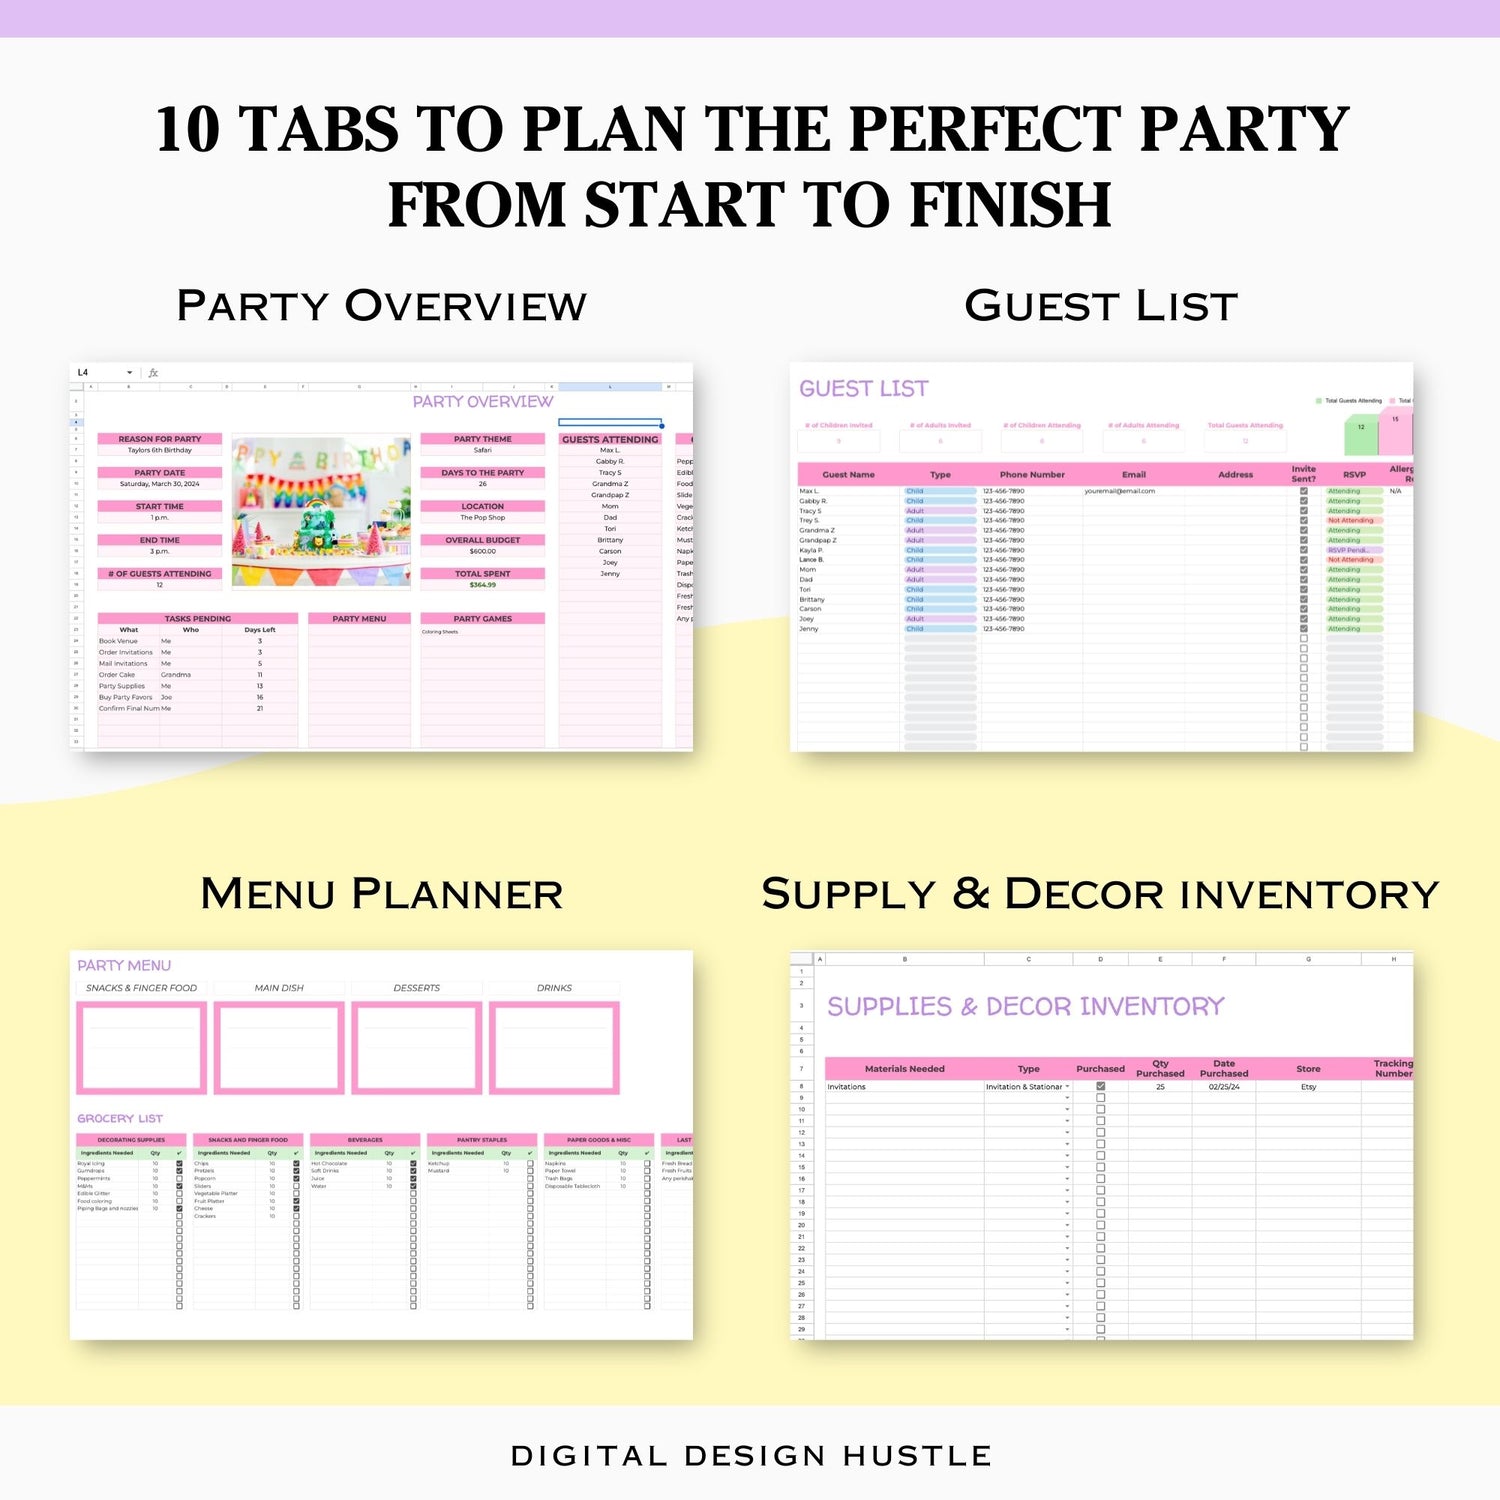 Plan the perfect party effortlessly with our Birthday Party Planning Spreadsheet designed specifically for Google Sheets! This comprehensive Digital Event Planner includes 10 meticulously organized tabs, each tailored to streamline every aspect of your event preparation.